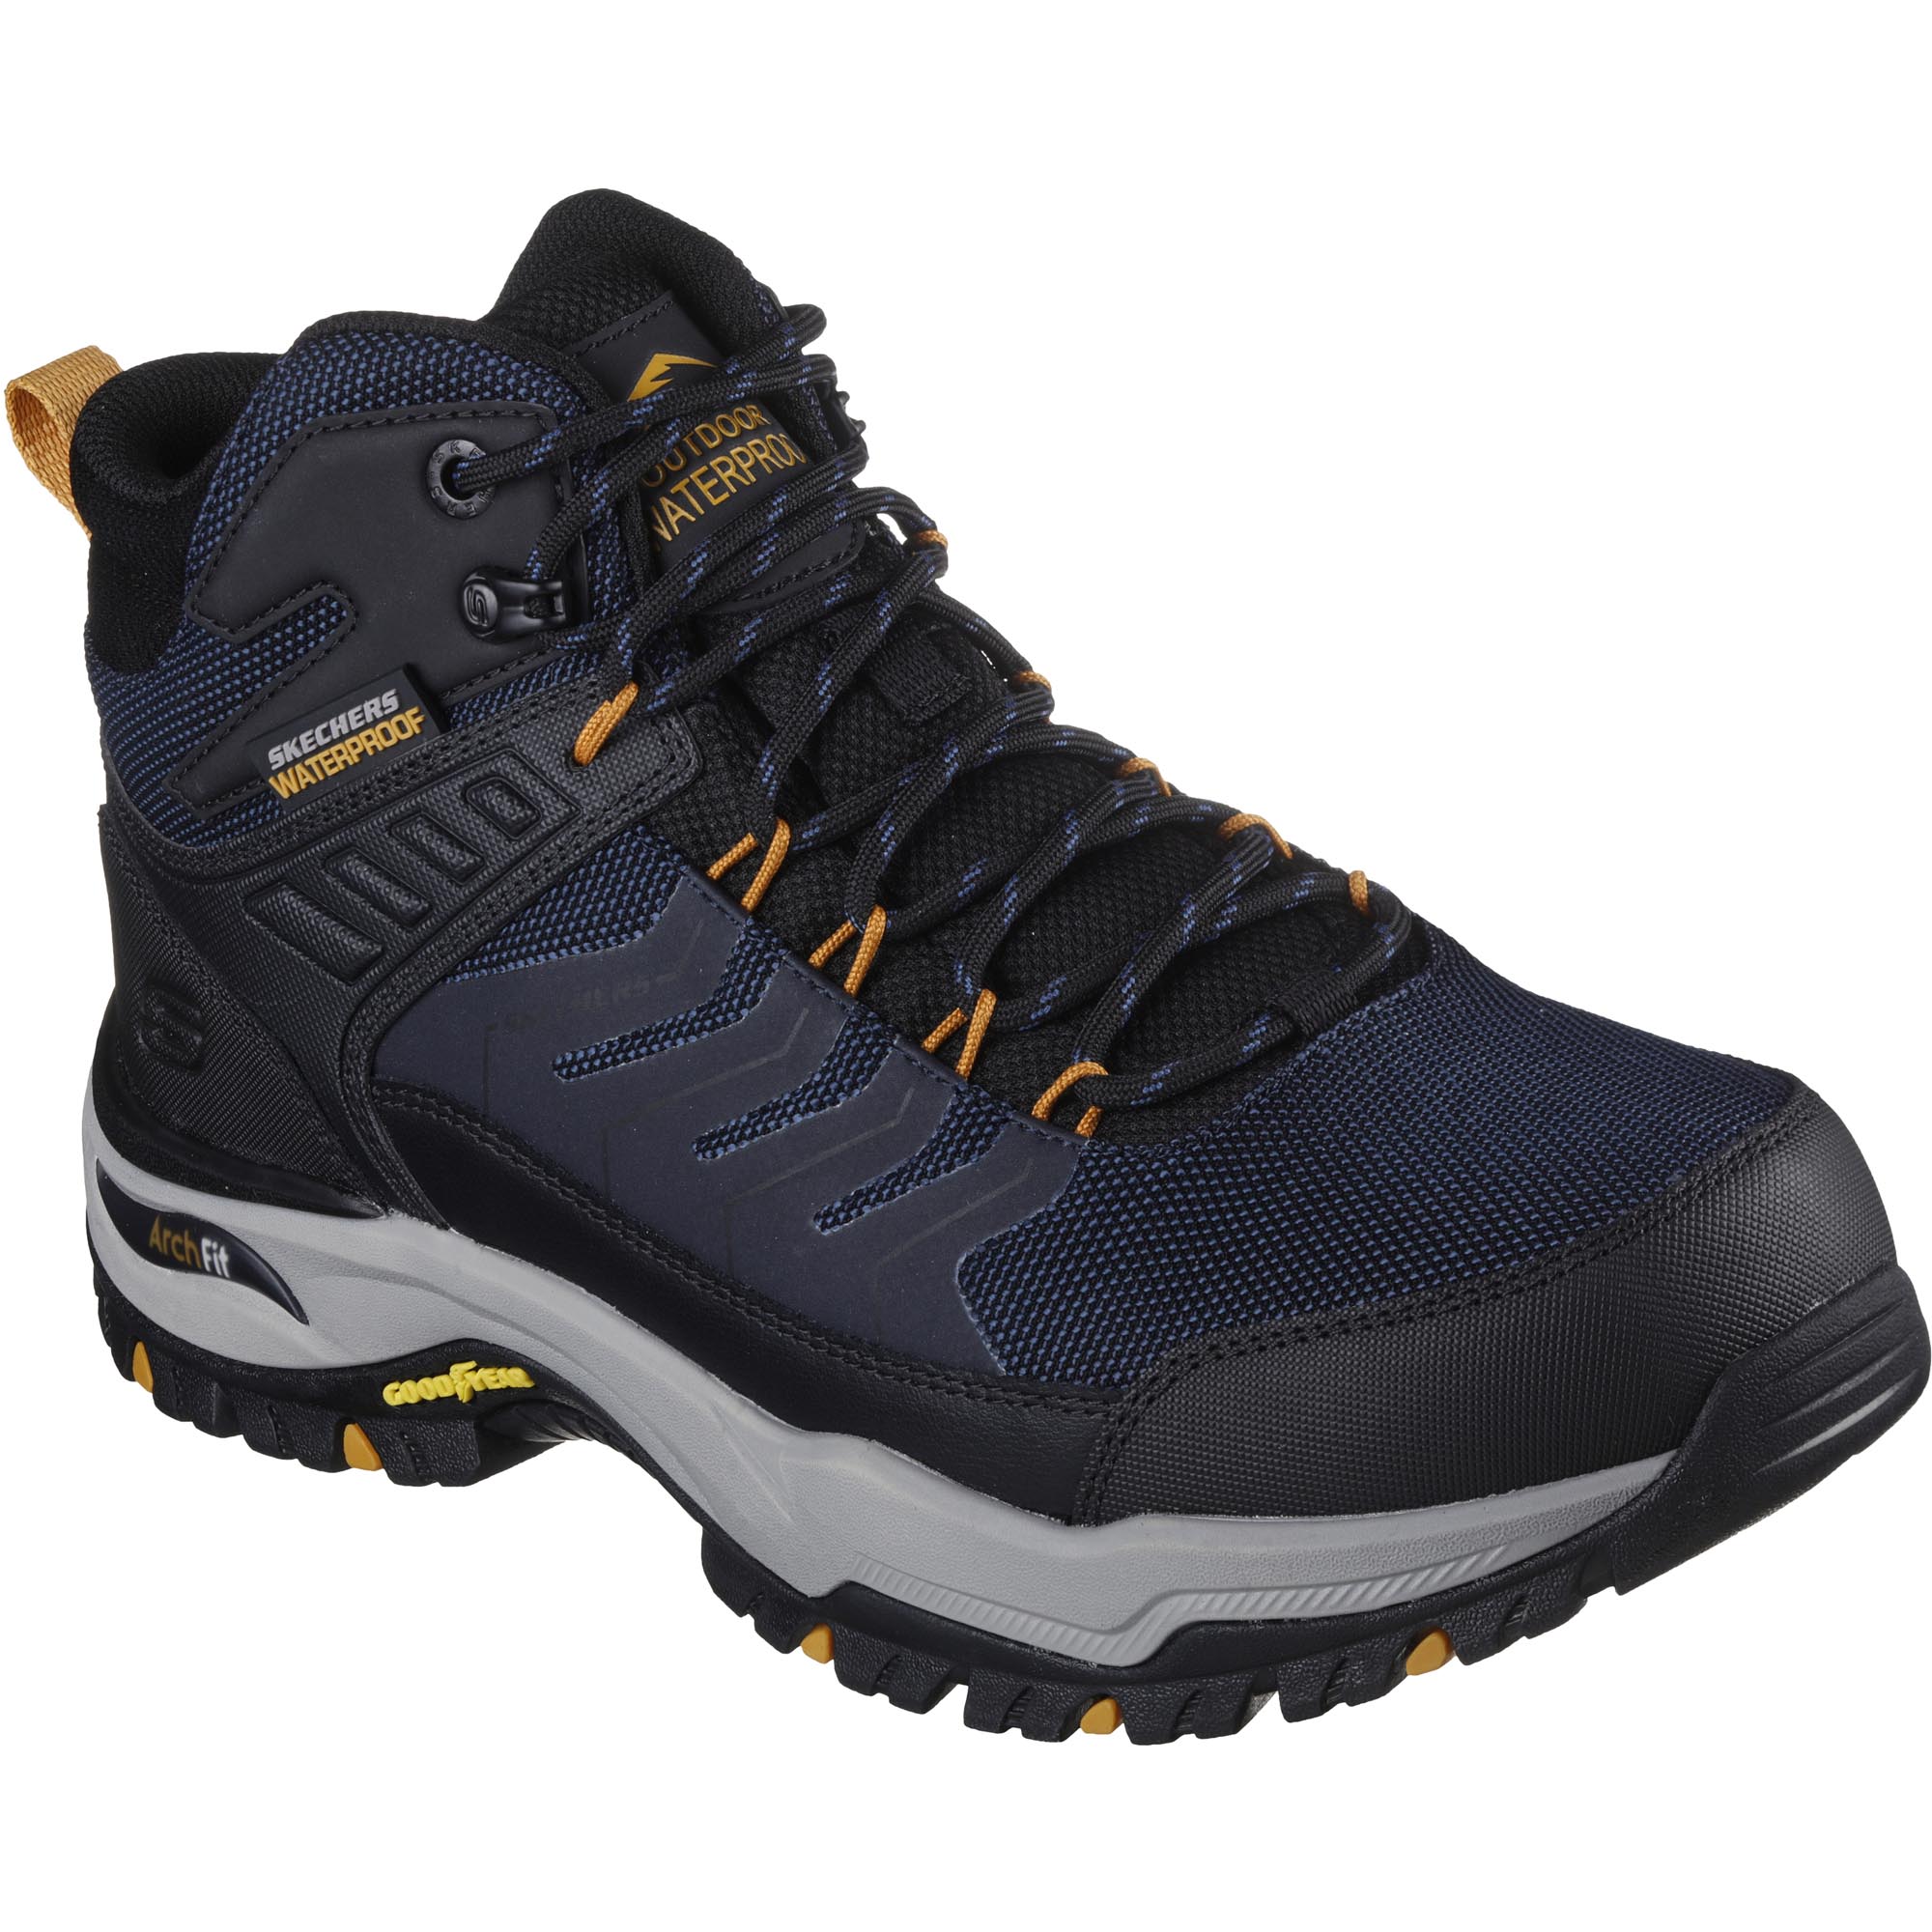 Skechers Relaxed Arch Fit Dawson Raveno Hiking Boots